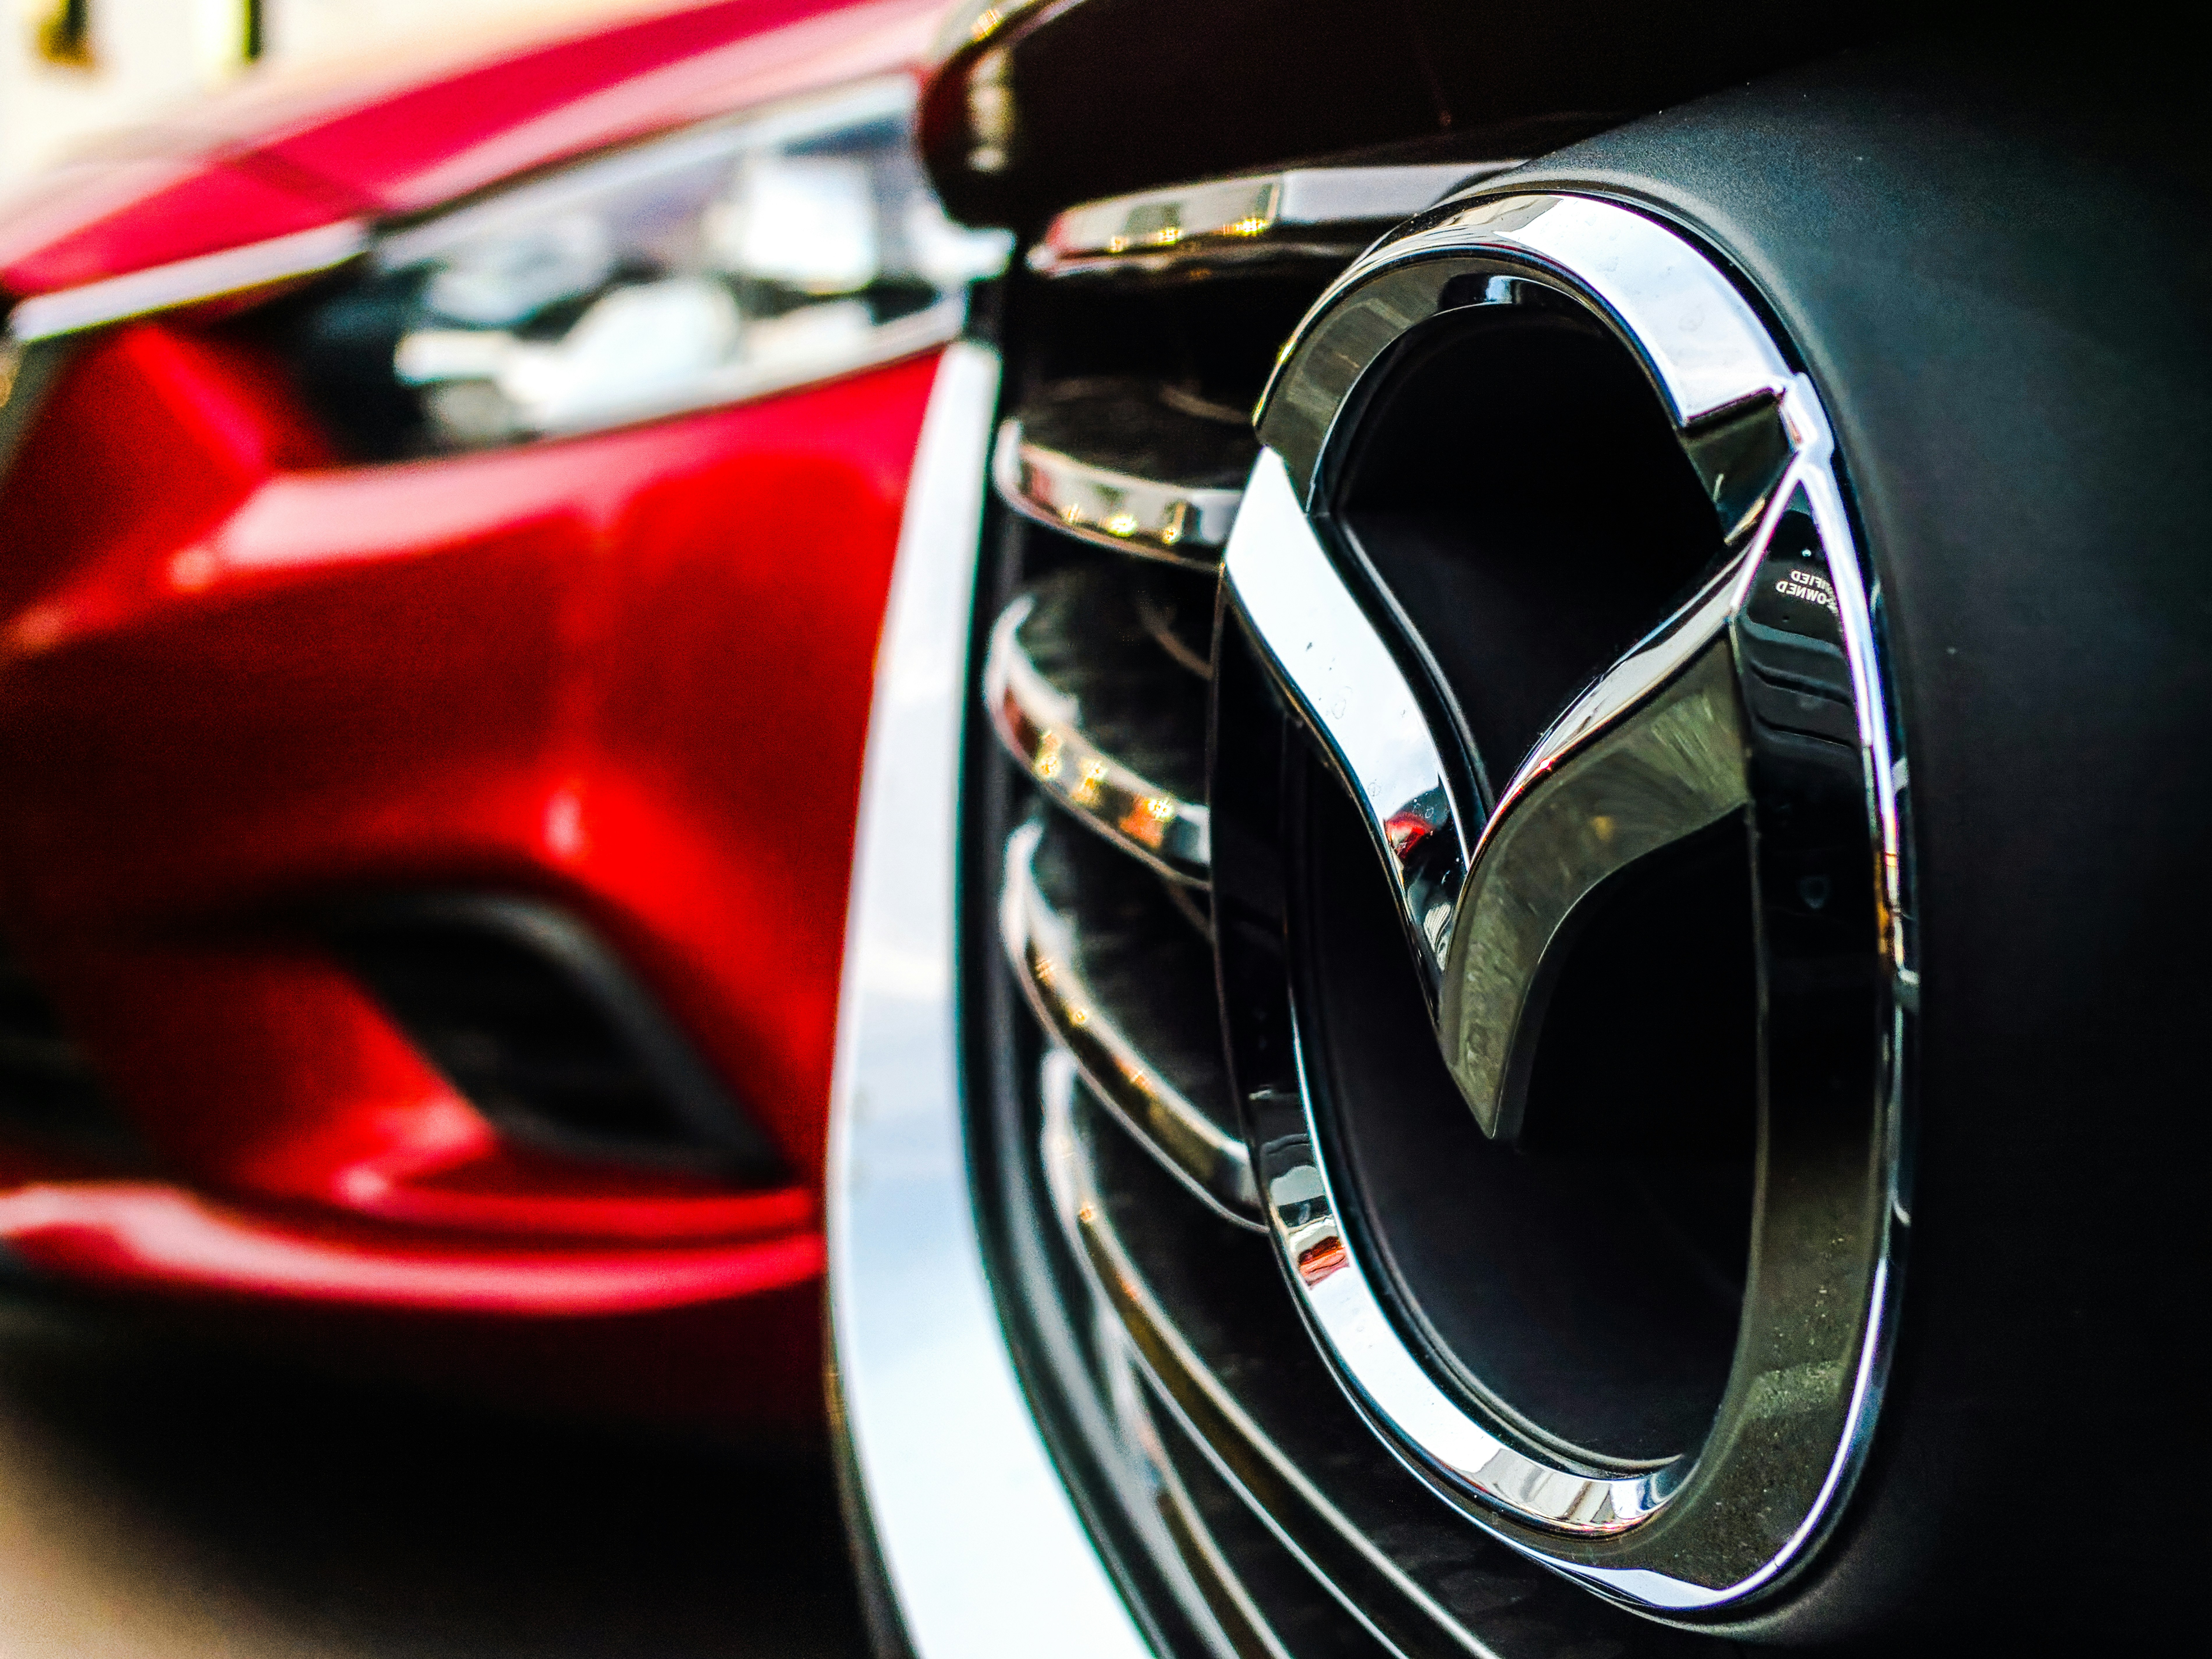 Close up of a Mazda 6's front emblem during sunset.